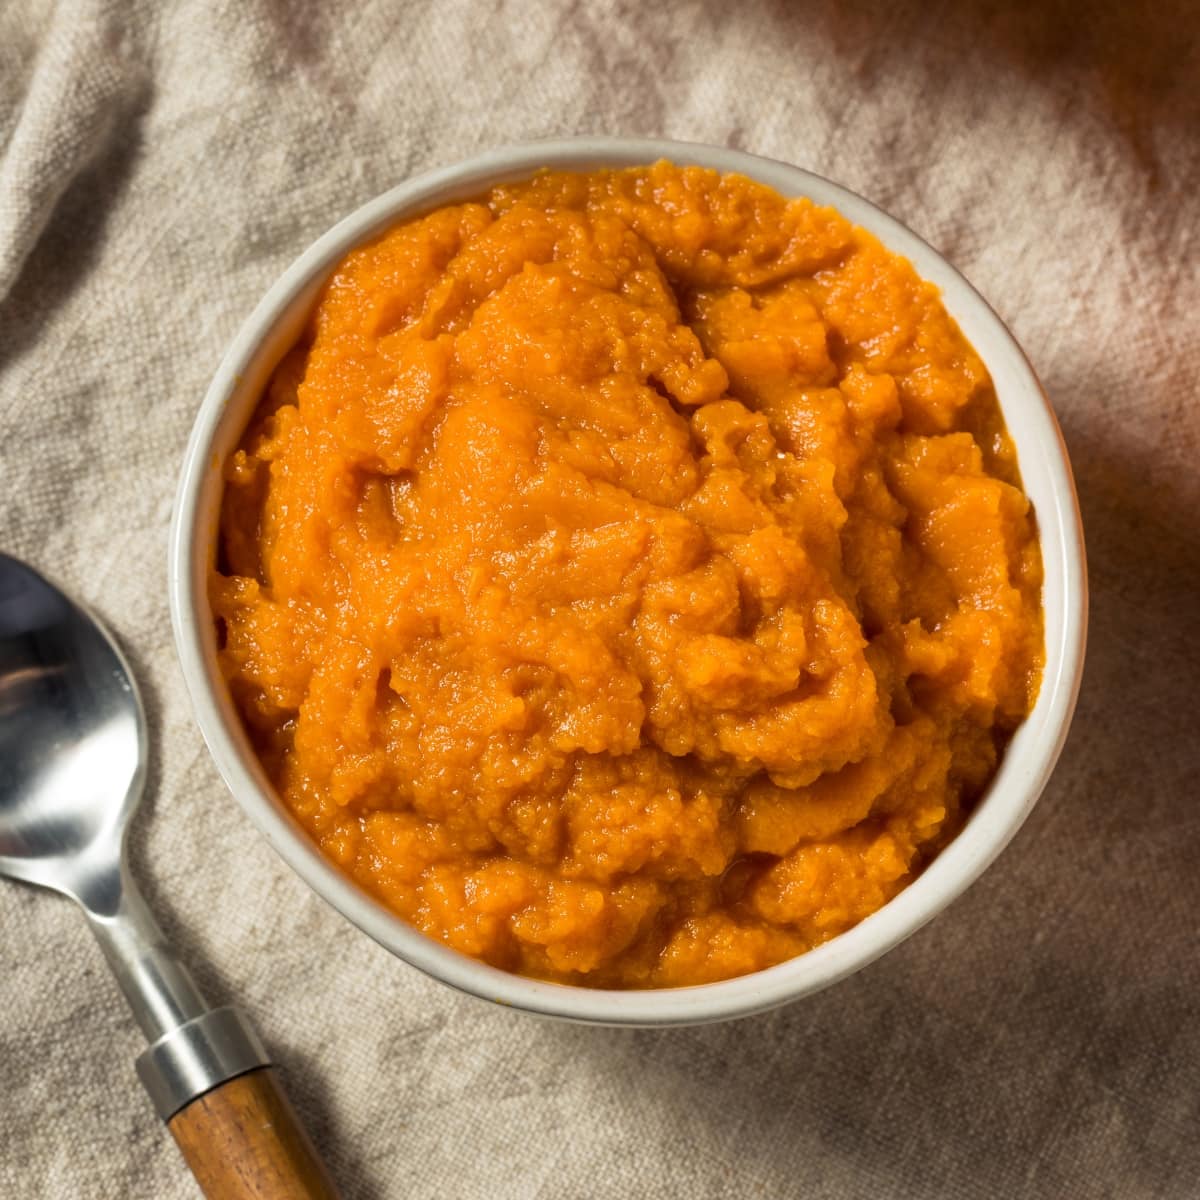 Pumpkin Puree in a Glass Bowl on a Rustic Cloth with a Spoon Next to the Bowl